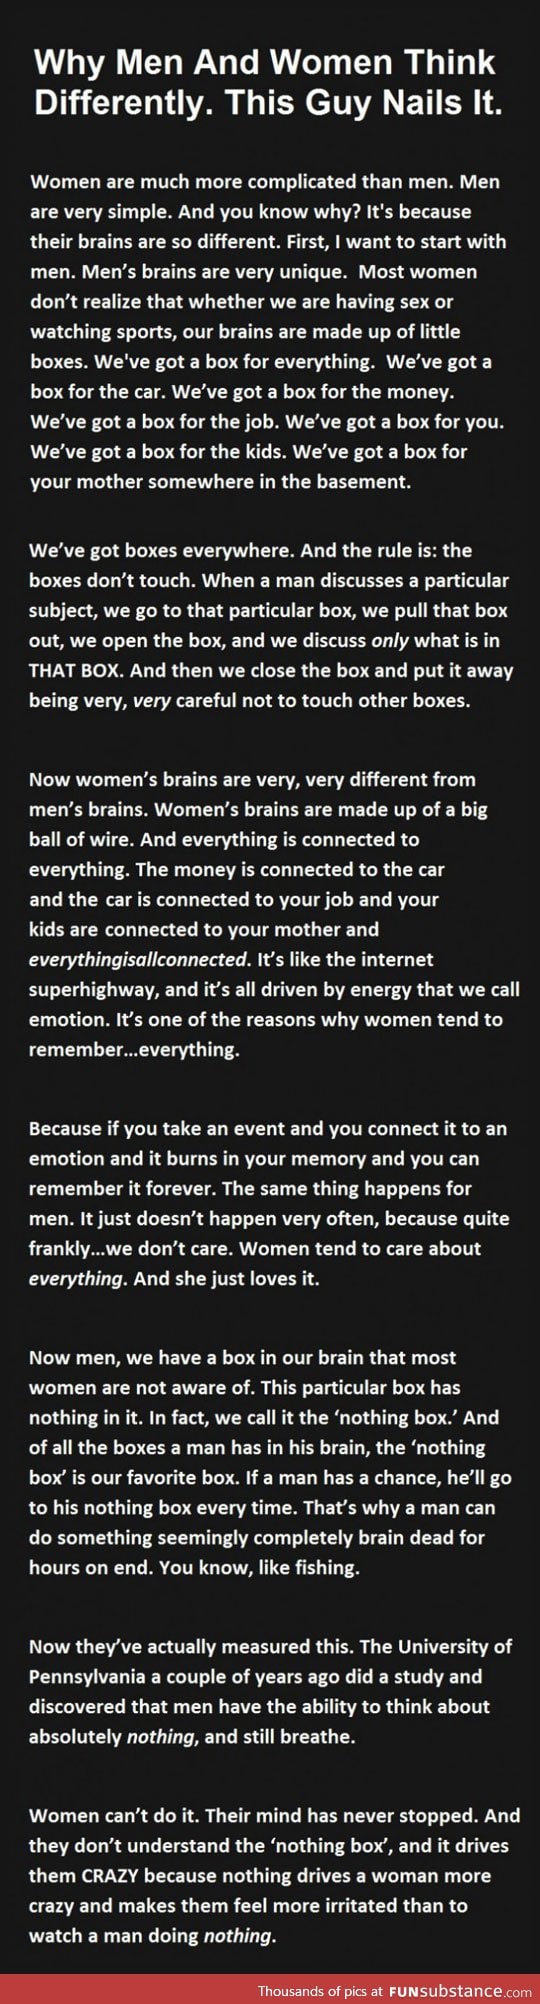 Why men and women think differently